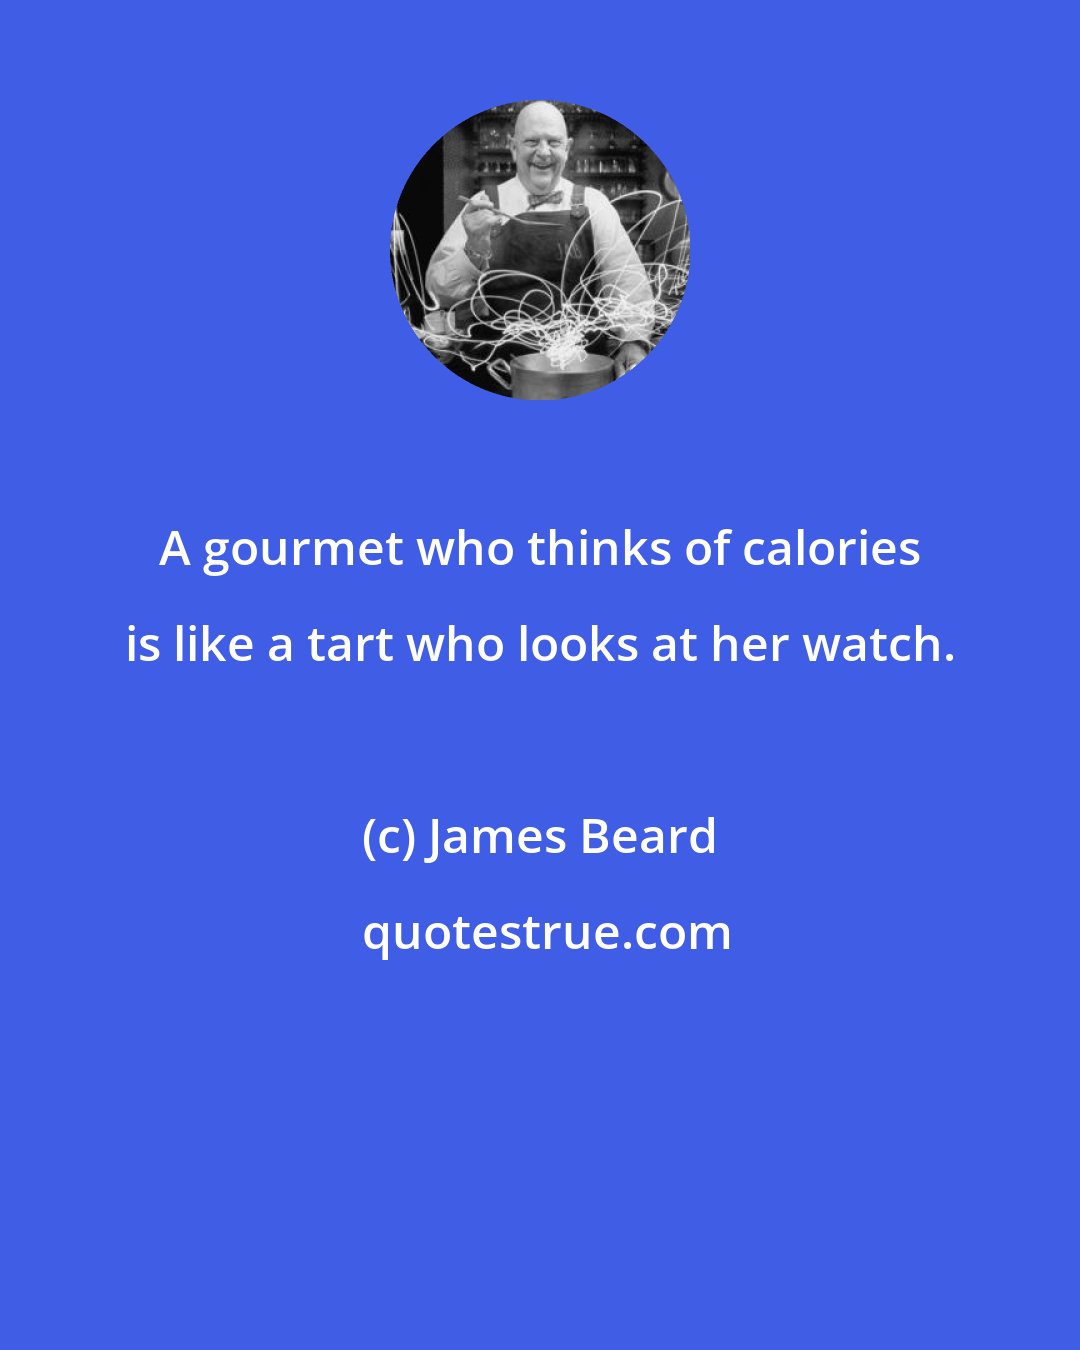 James Beard: A gourmet who thinks of calories is like a tart who looks at her watch.